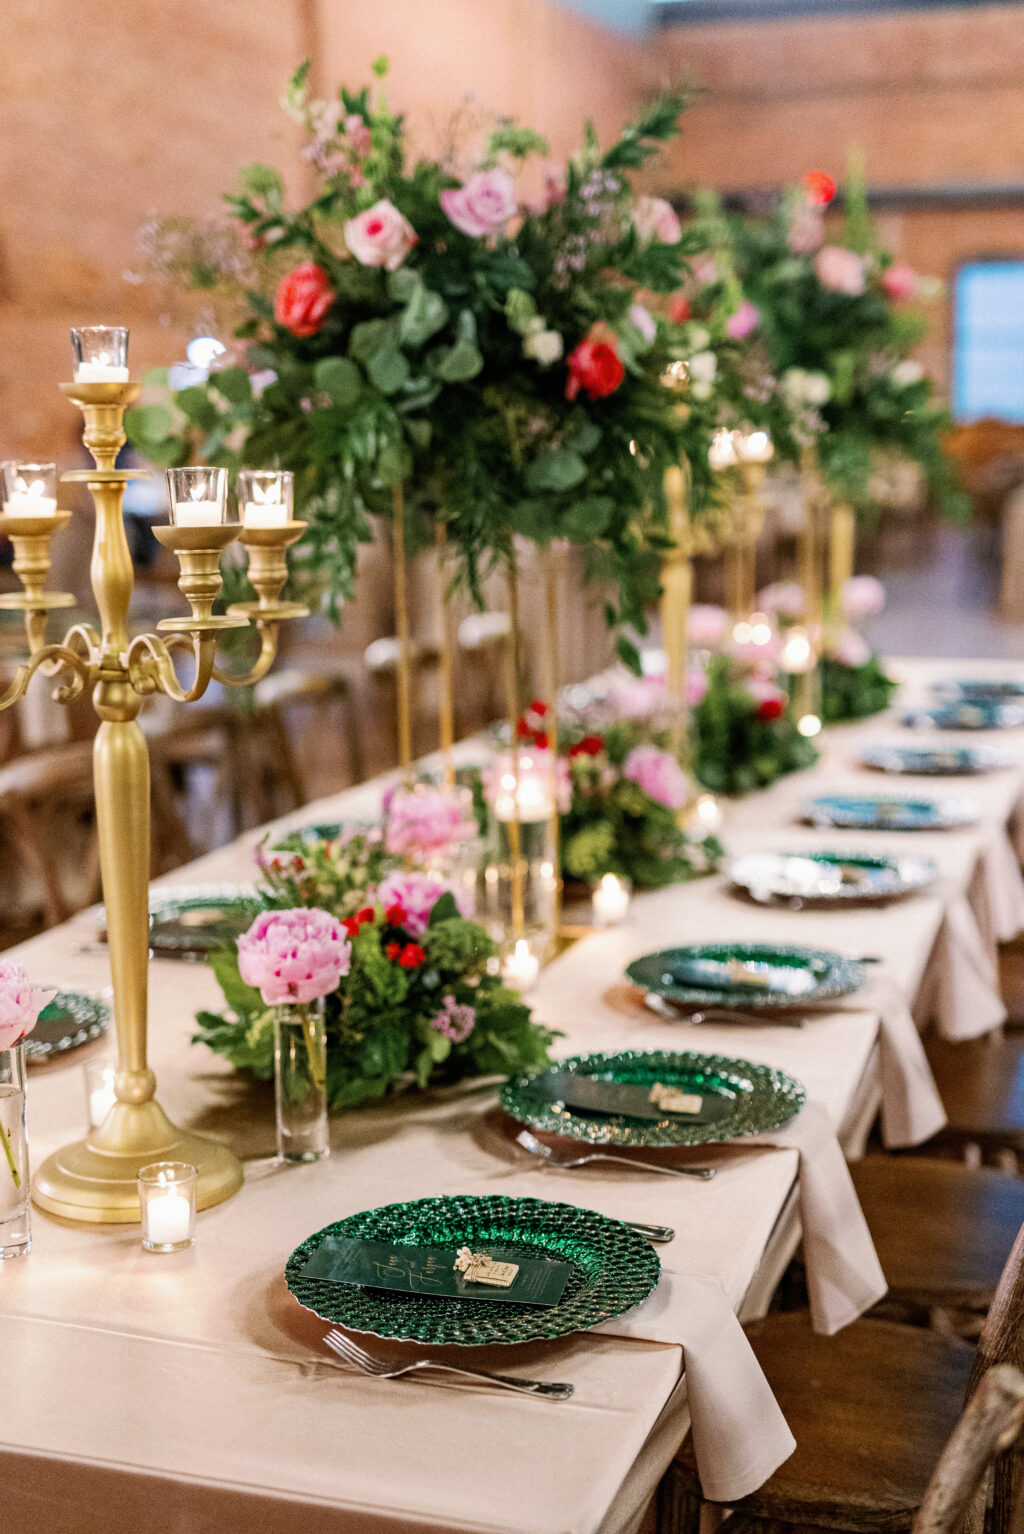 Gold Candelabra | Pink, Red, and White Roses with Eucalyptus Greenery in Gold Tall Stands | Green Chargers | Long Feasting Tables | Emerald Green Chargers | Tampa Bay Wedding Rental Company A Chair Affair